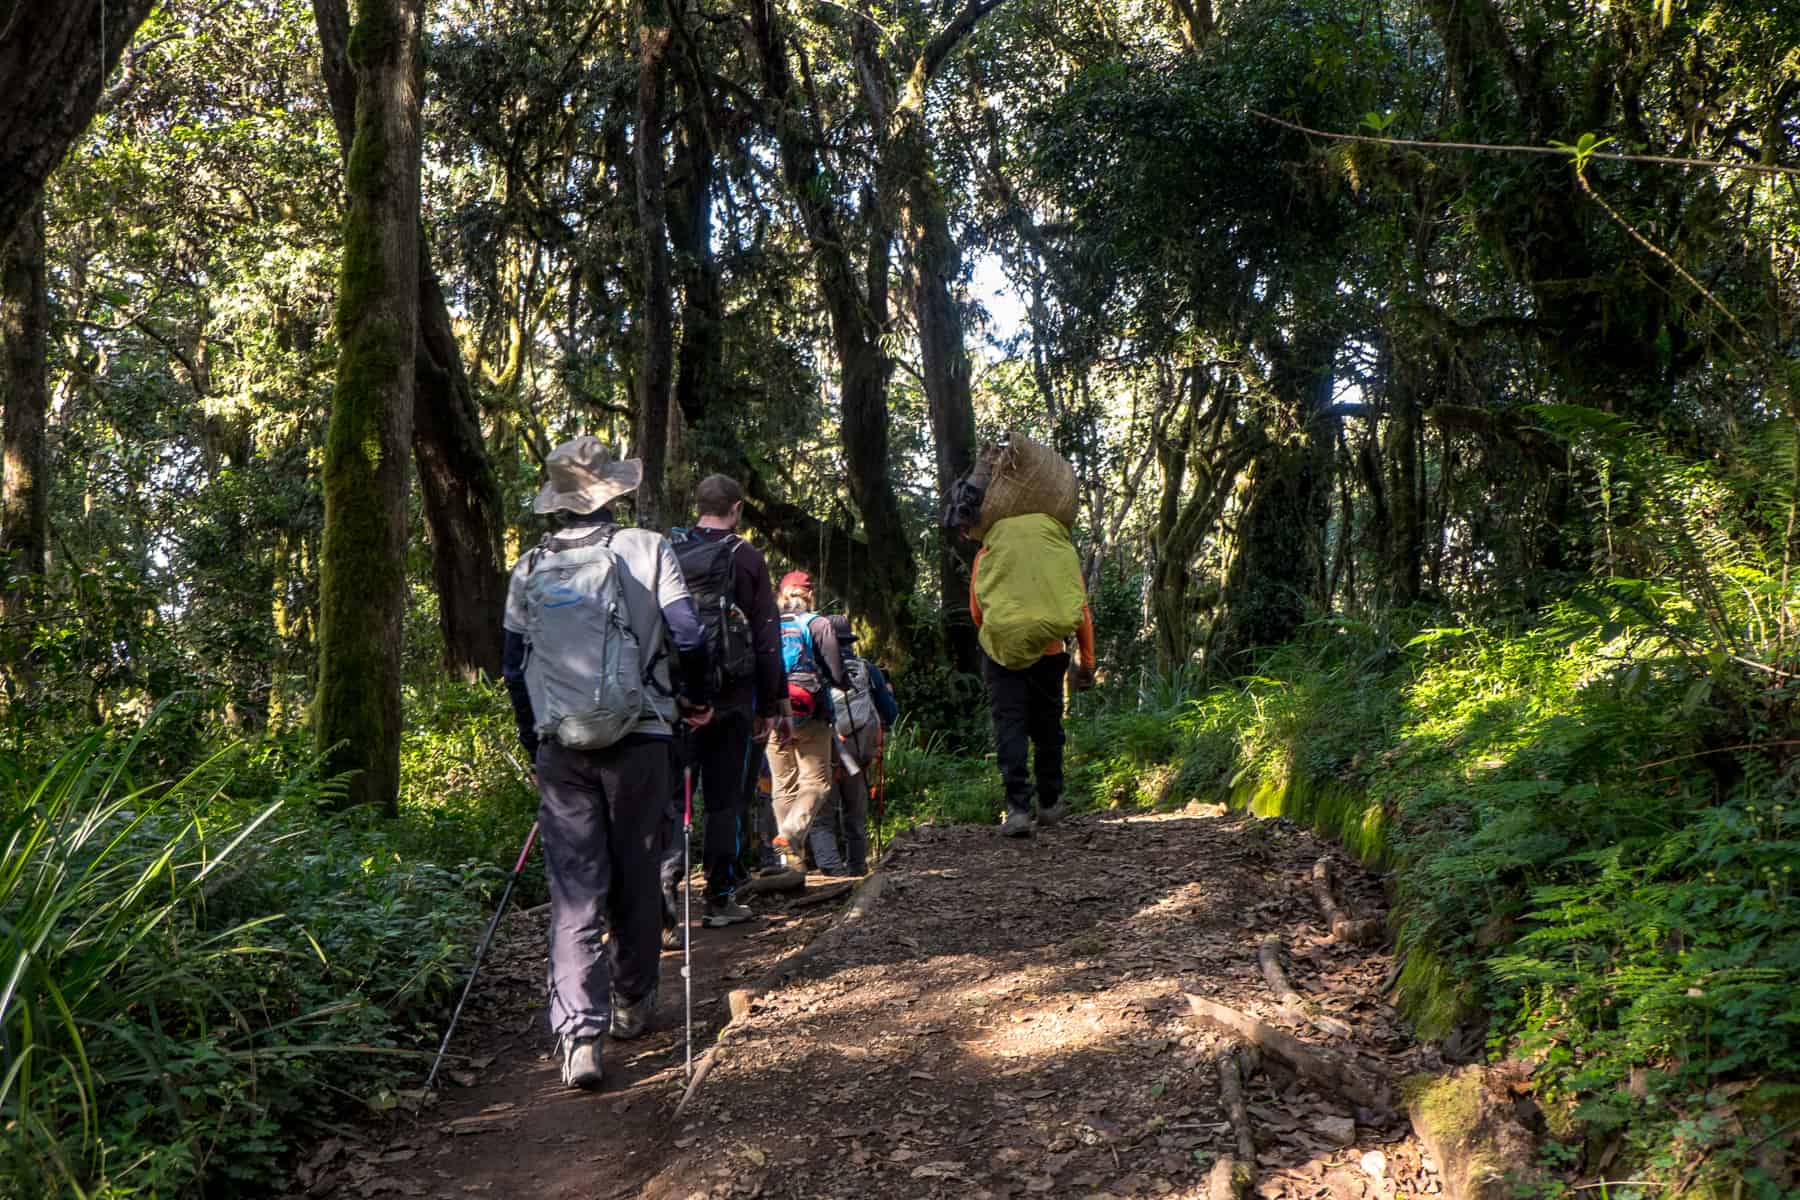 A group of trekkers walking in a line on an orange muddy path through the thick Rainforest of Kilimanjaro. They follow a porter carrying a large green sack and a wicker basket.